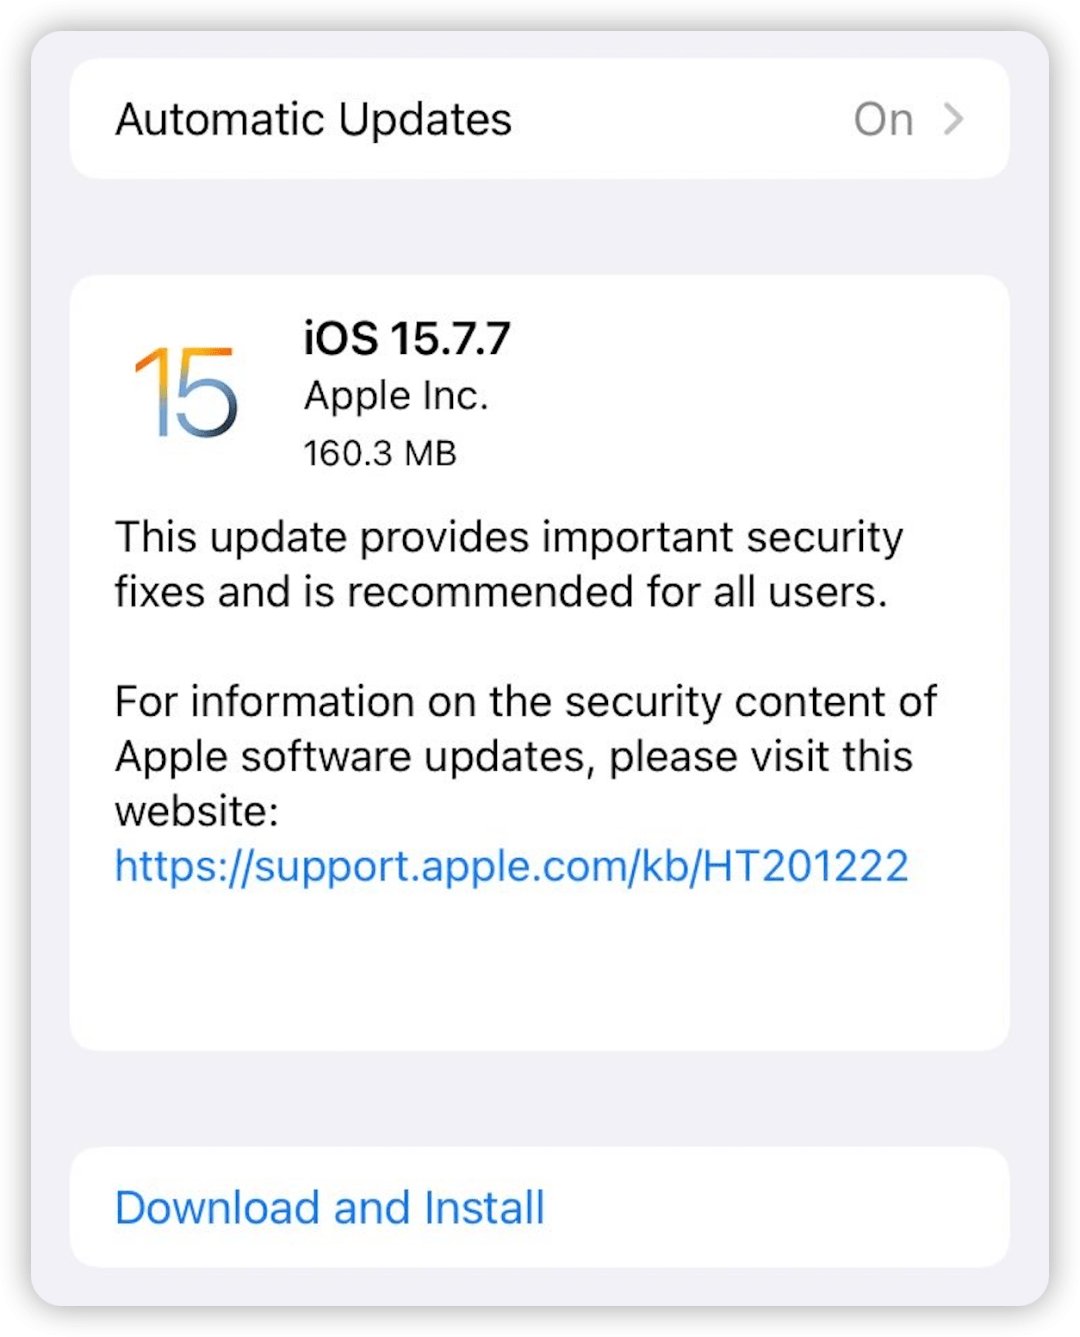 iphone 7 update to ios 15.7.7